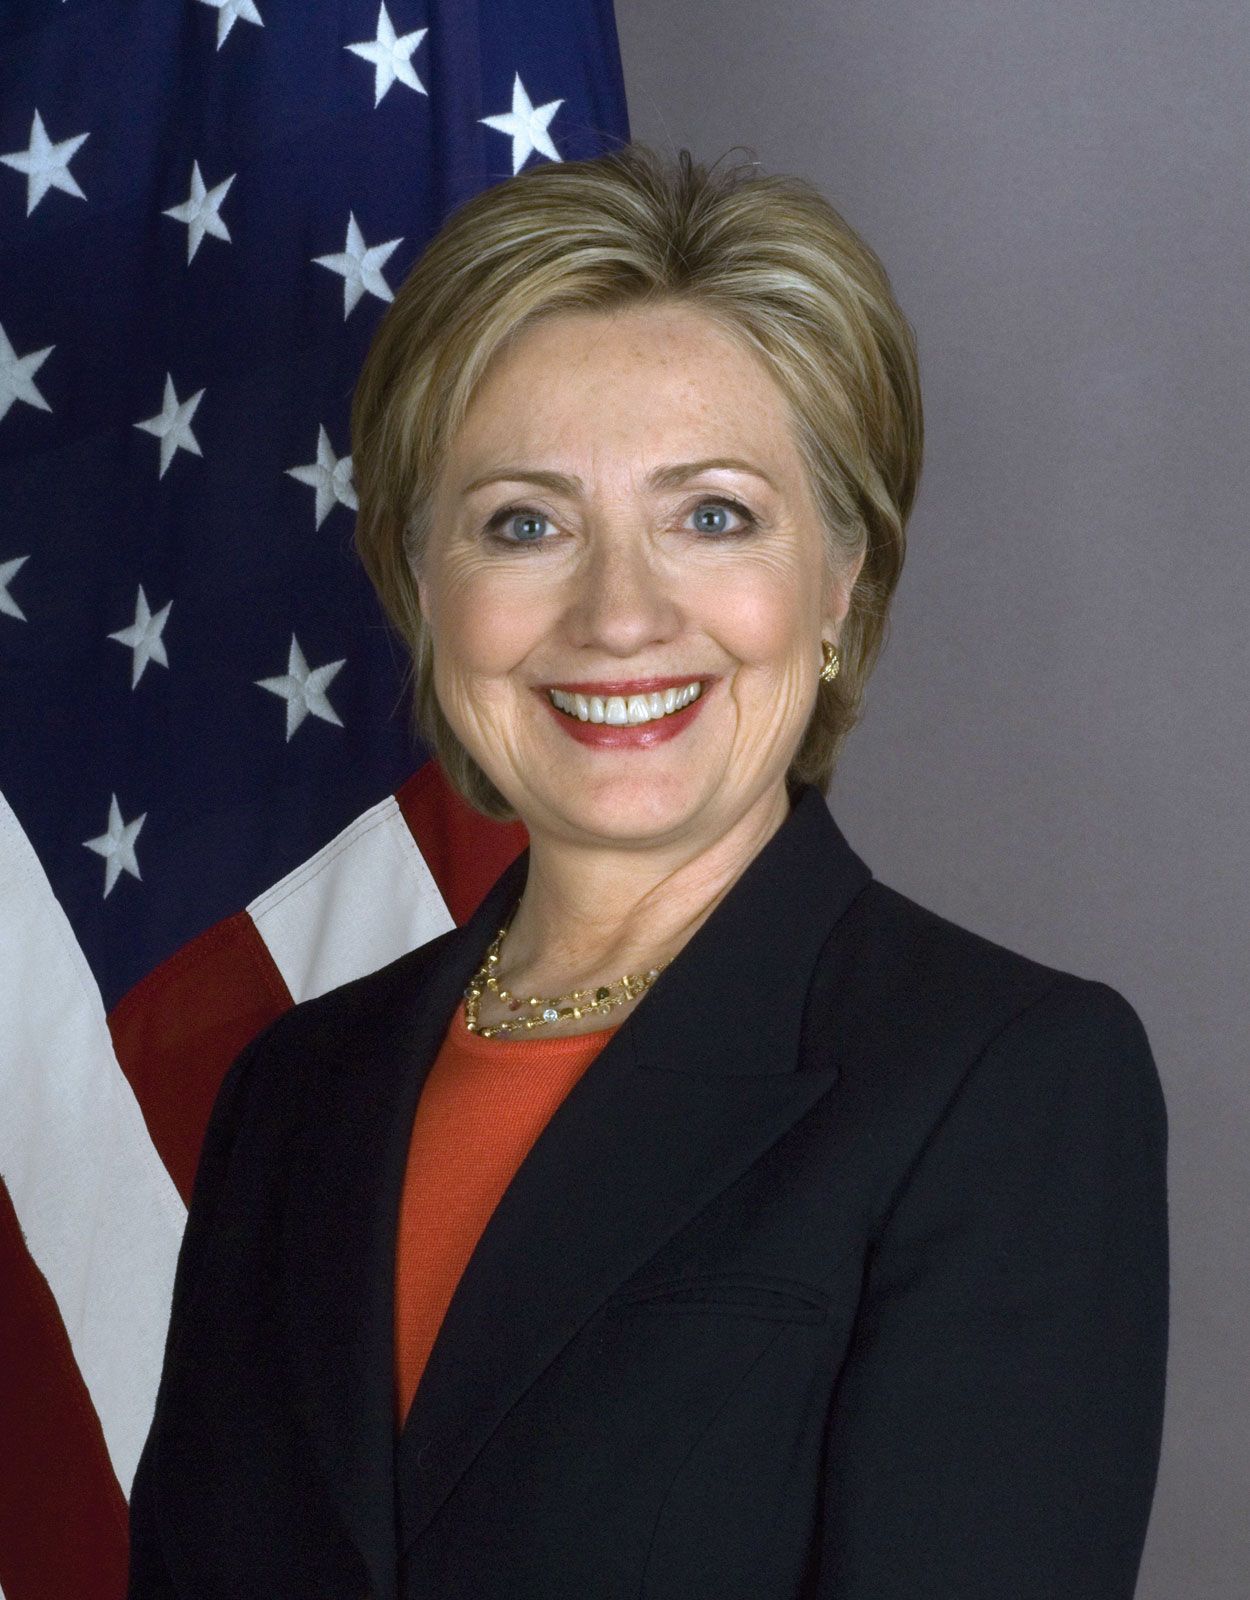 taille-hillary-clinton-Image